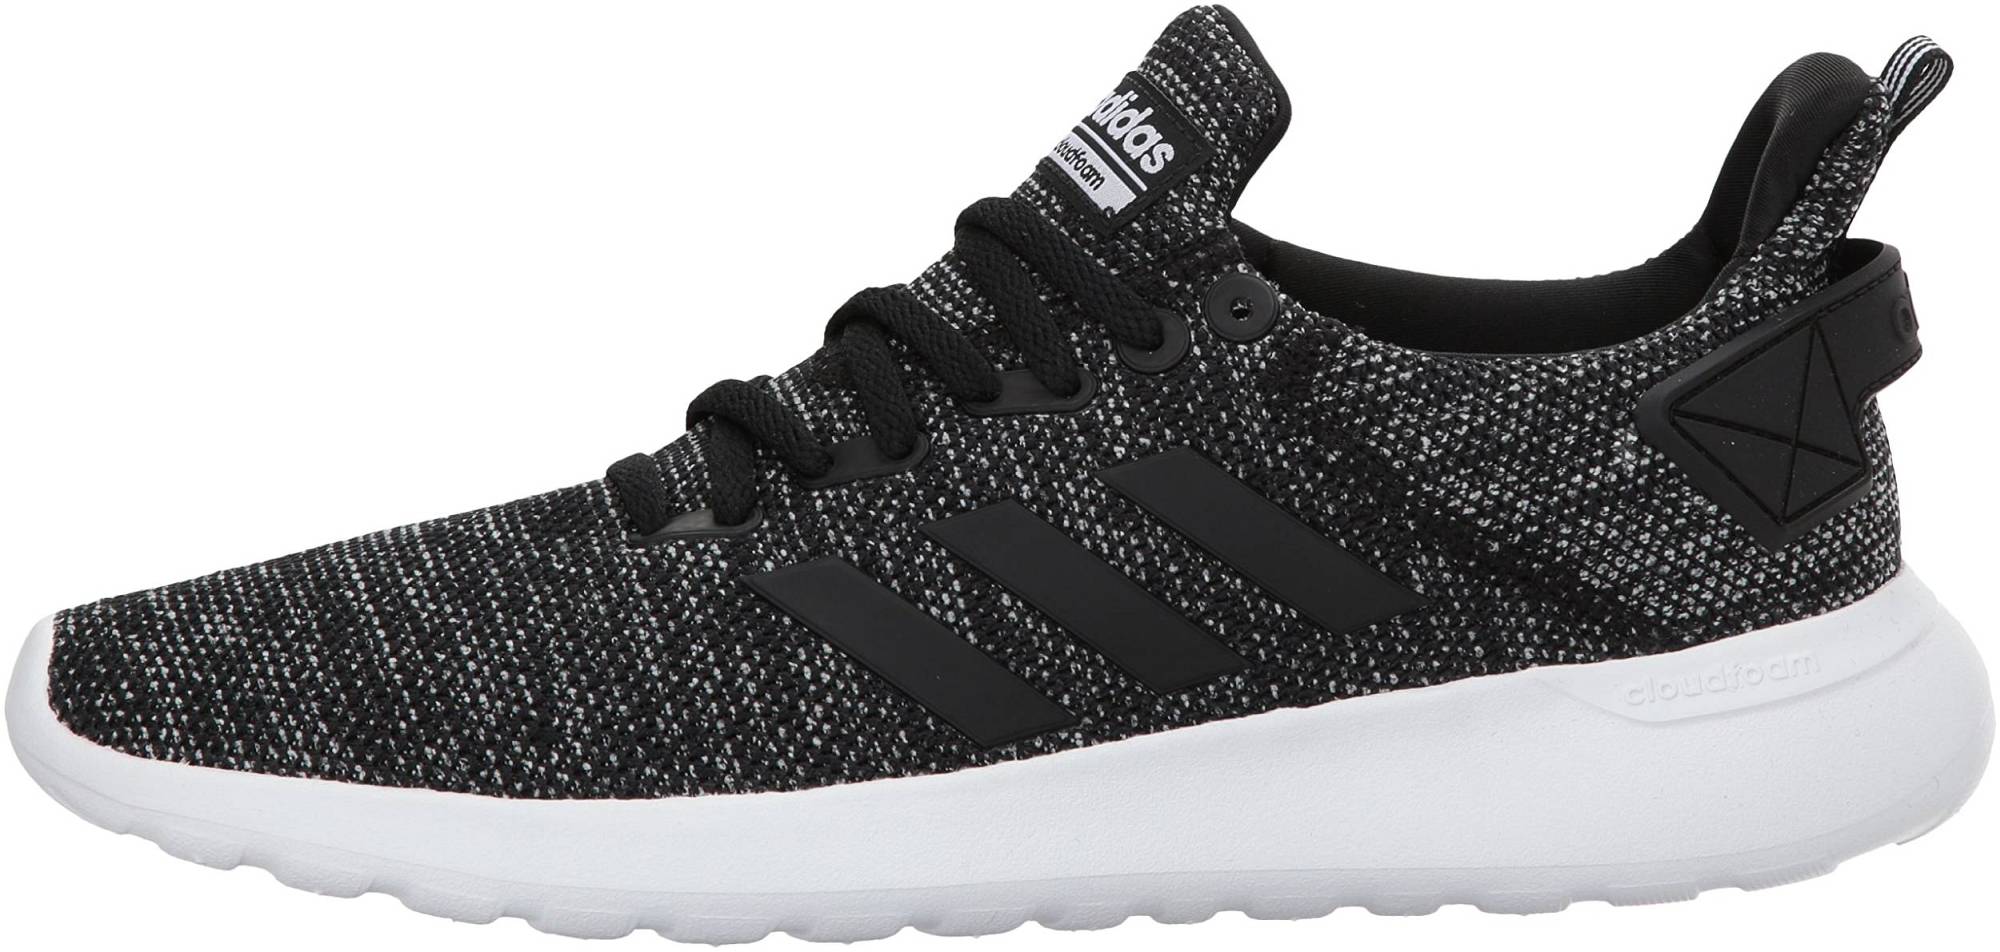 Adidas Lite Racer BYD – Shoes Reviews 